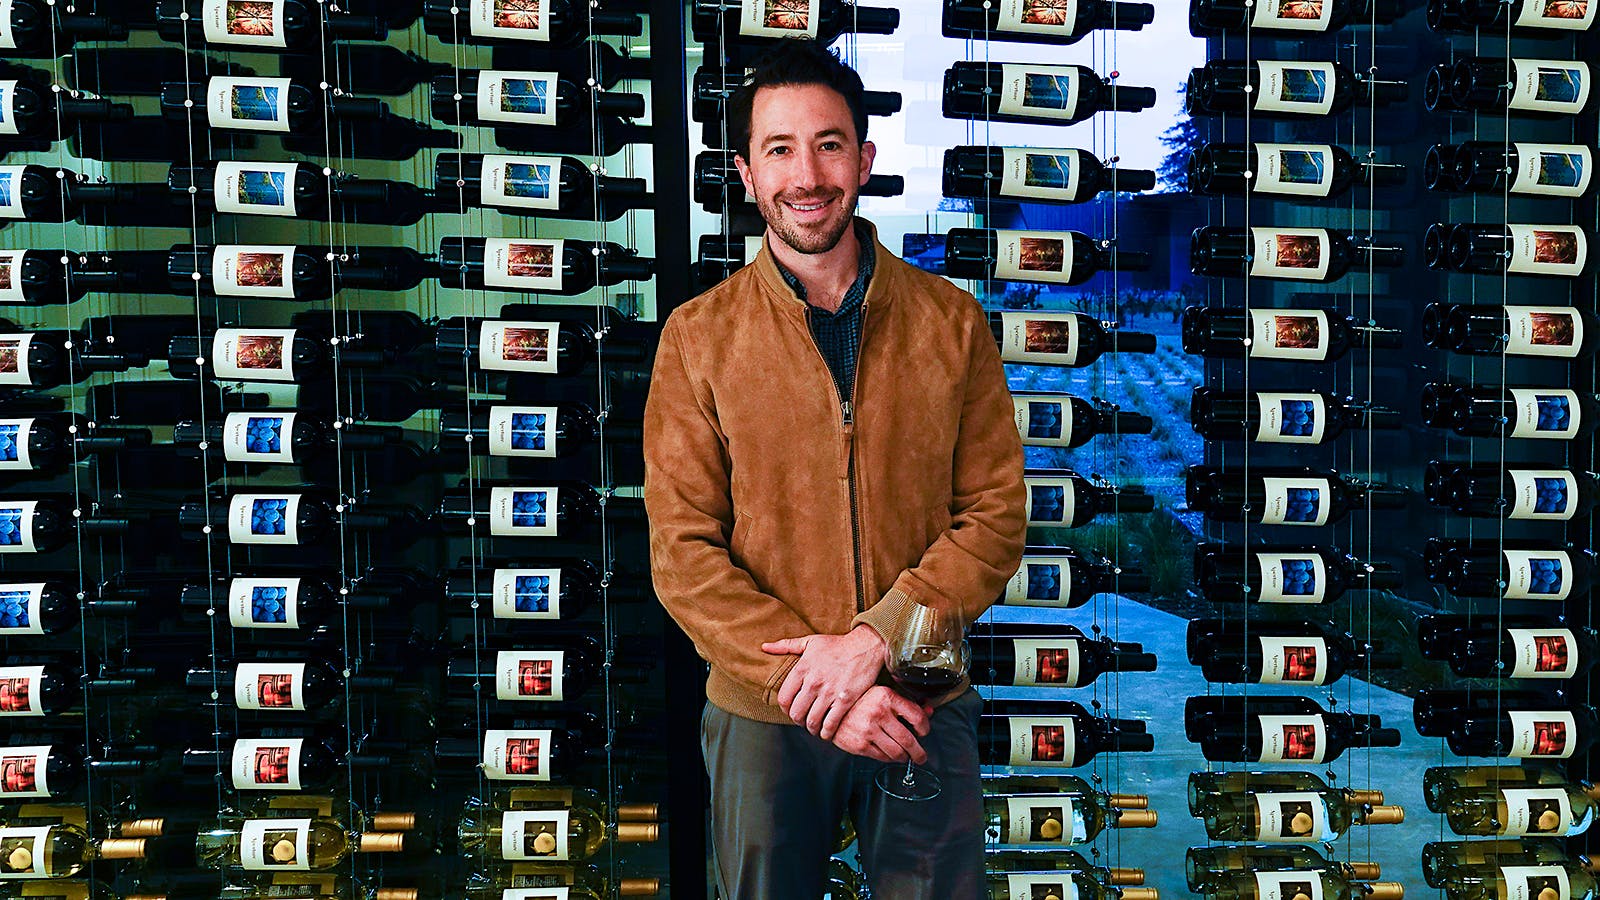 A Virtual Winery Opening: Sonoma Winemaker Jesse Katz Planned to Open his Tasting Room this Month